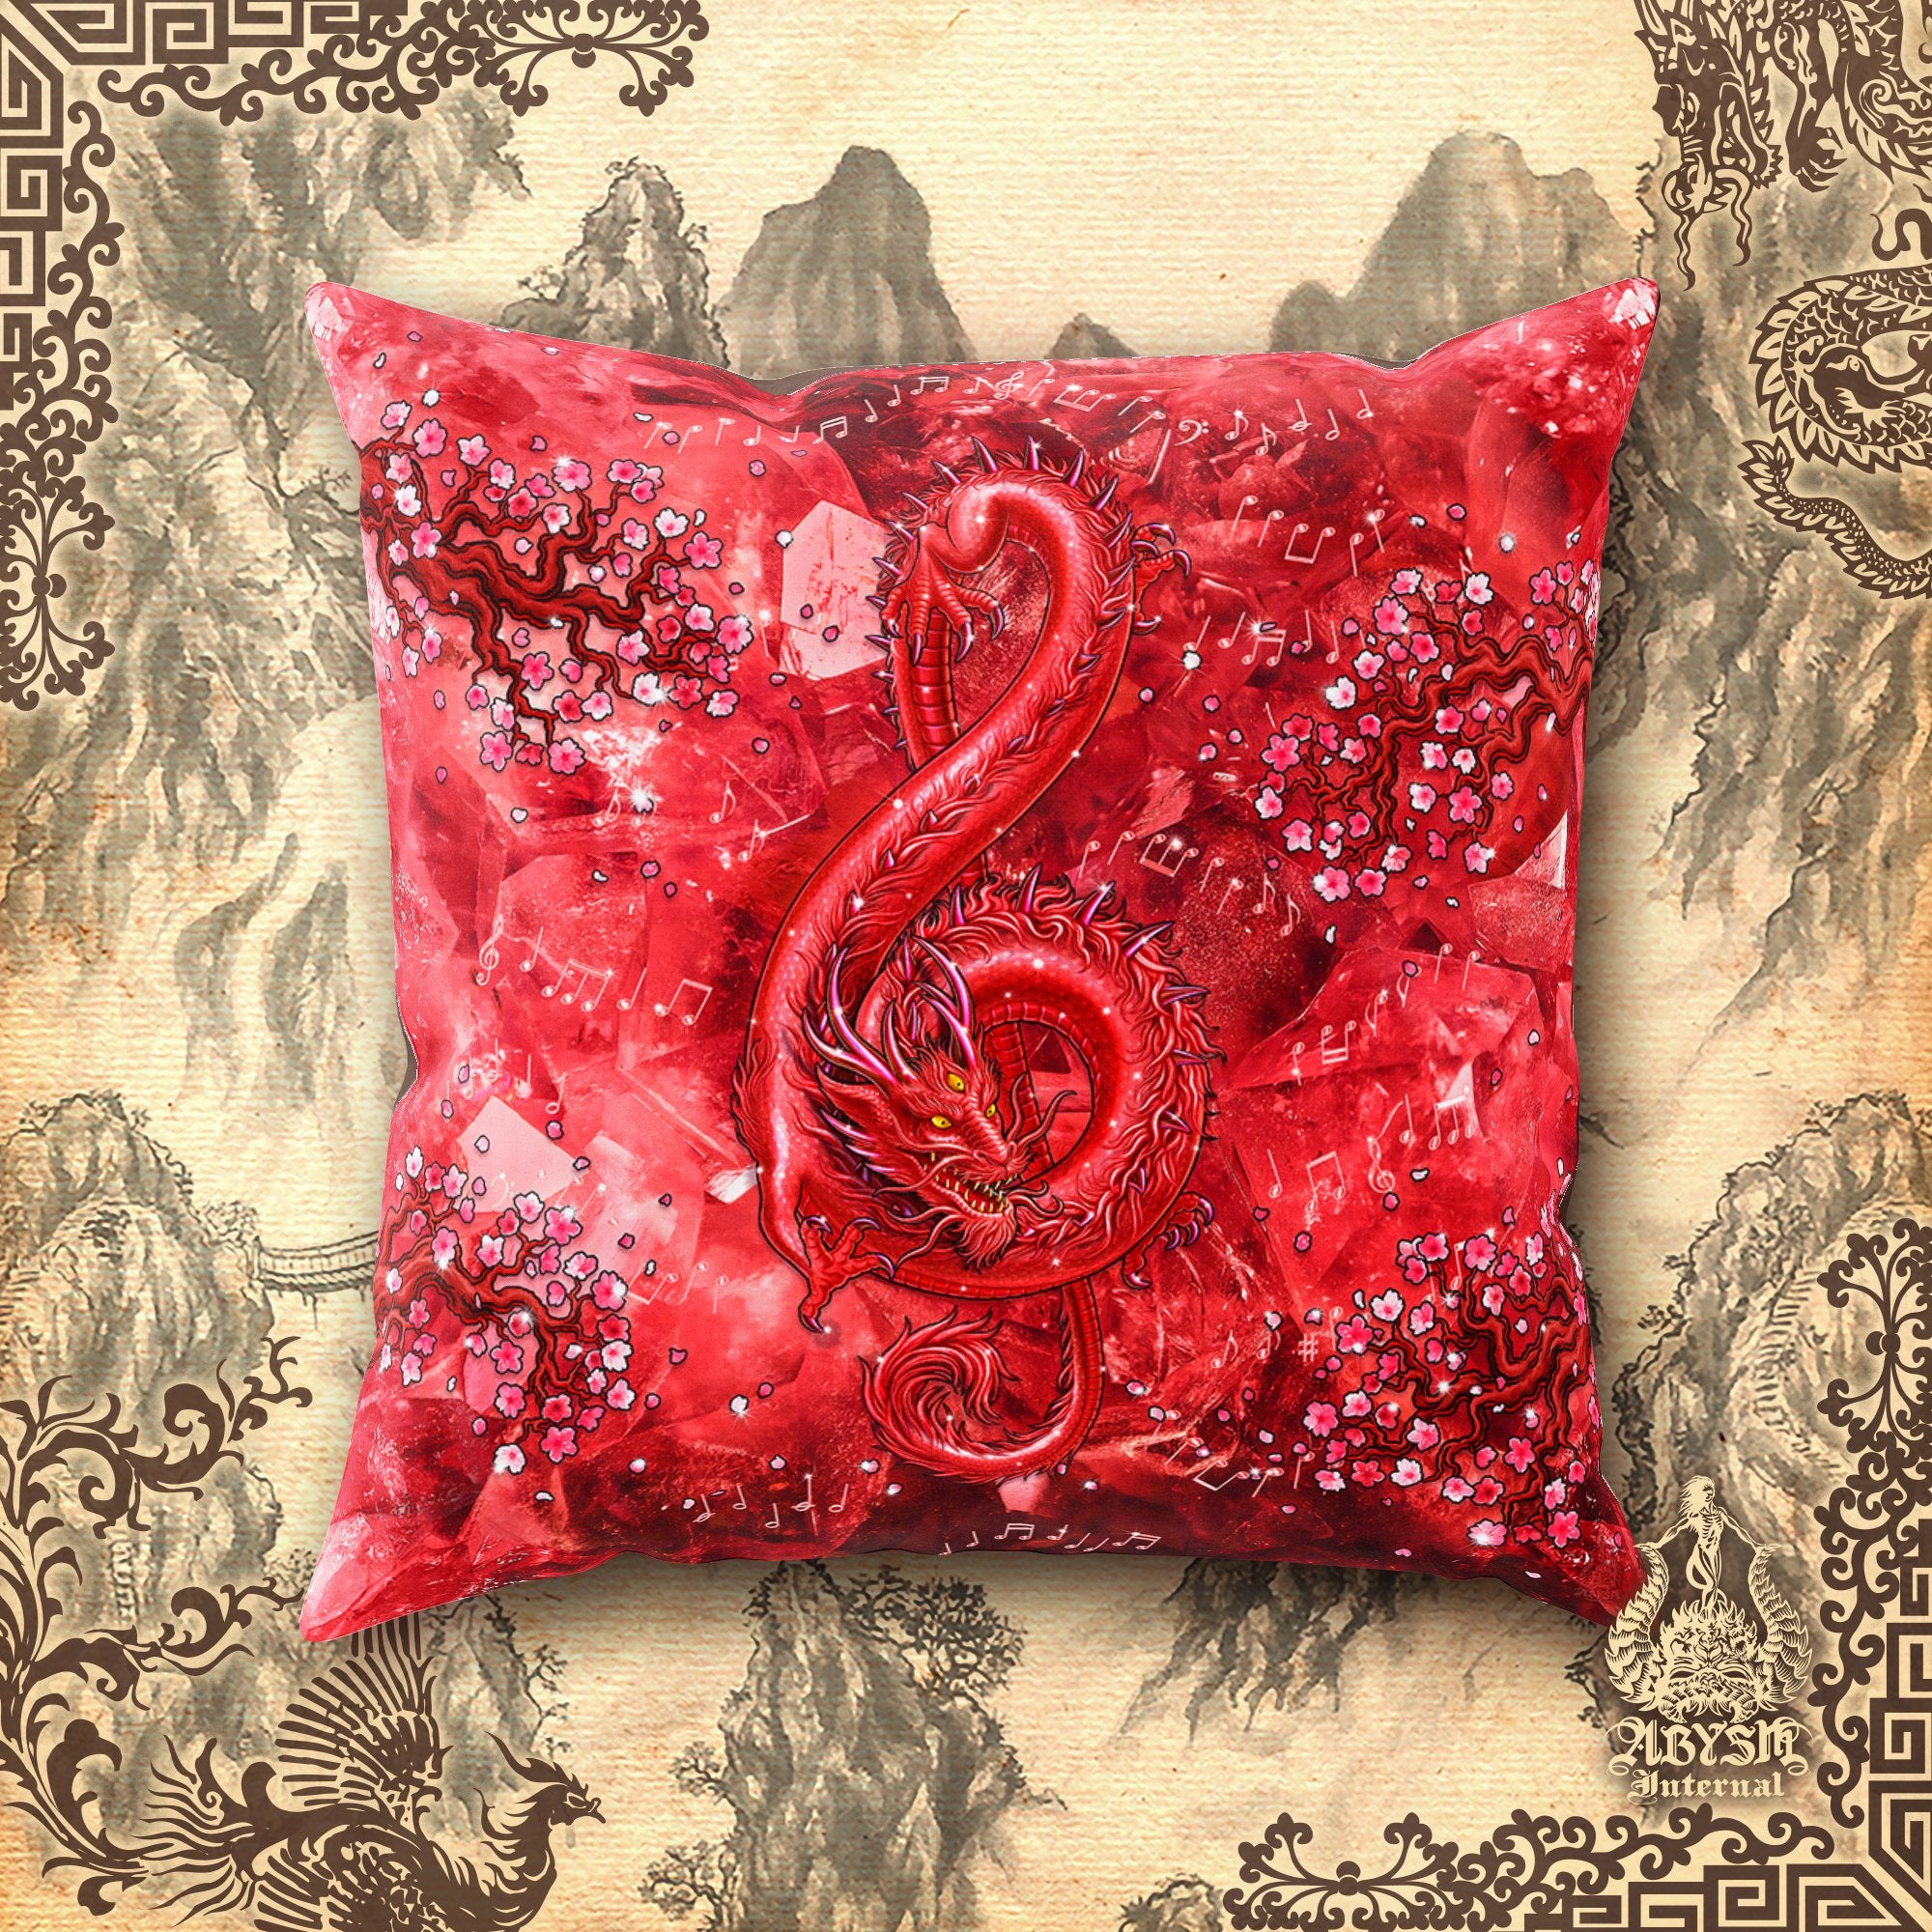 Eclectic Throw Pillow, Decorative Accent Pillow, Square Cushion Cover, Indie Design, Music Room Decor - Treble Clef Dragon, Gemstone, 8 Colors - Abysm Internal